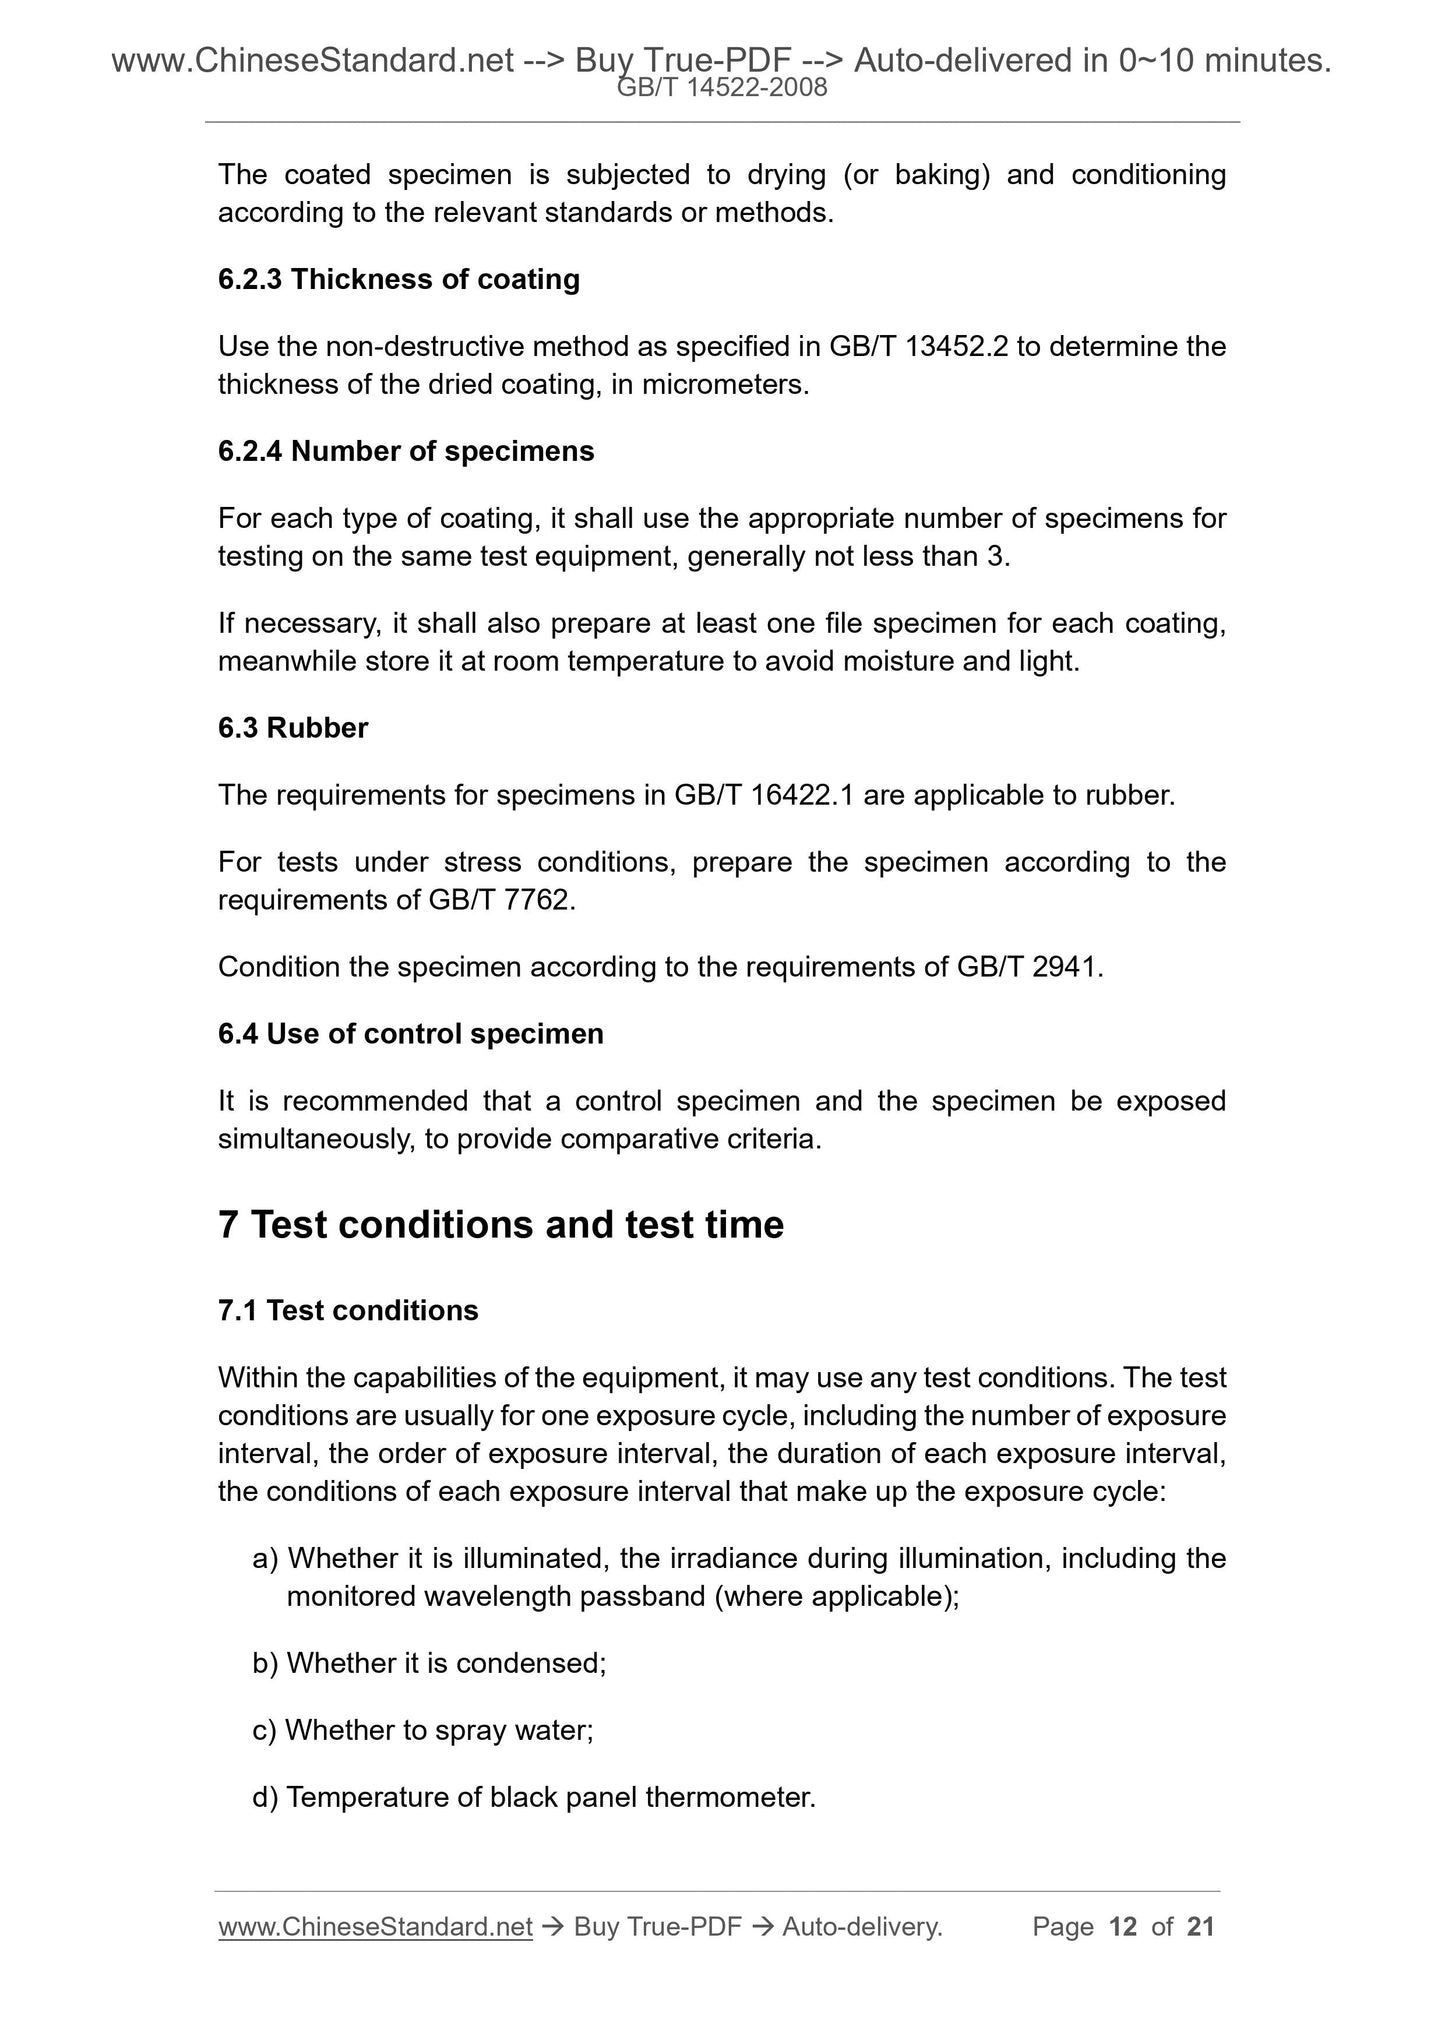 GB/T 14522-2008 Page 6